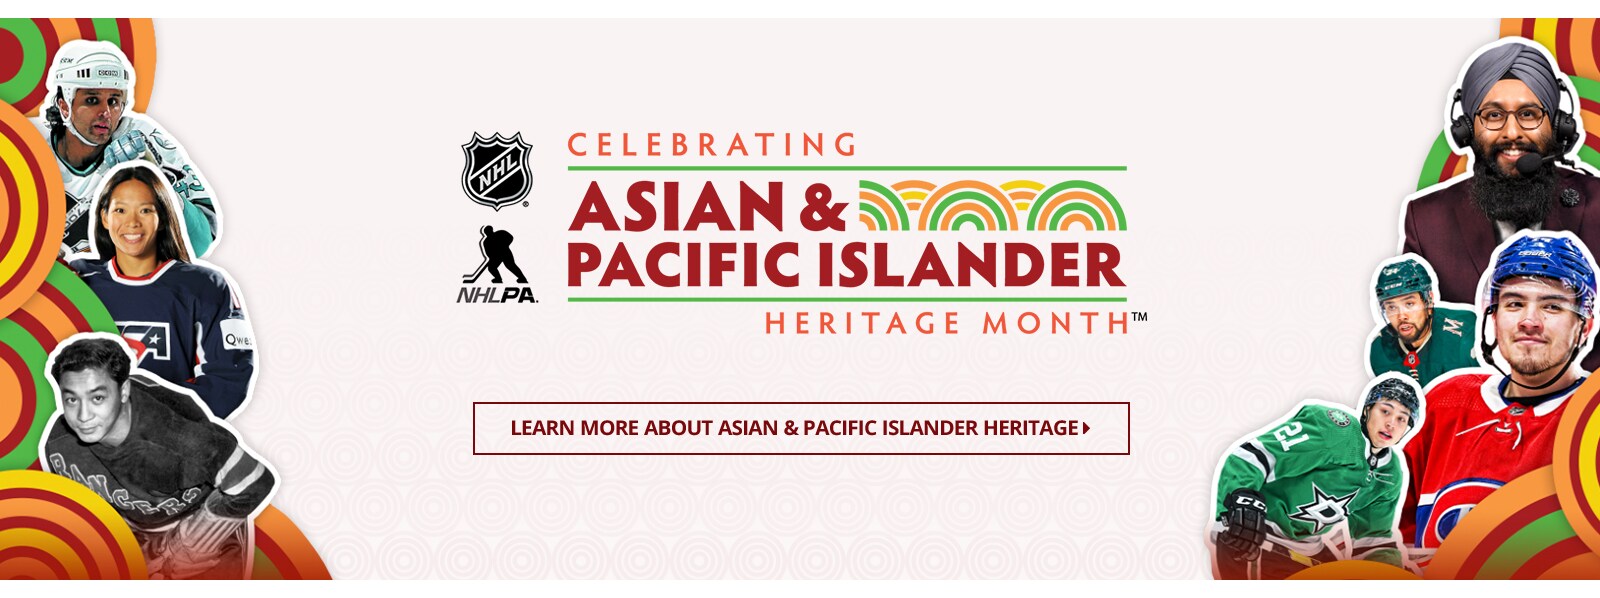 Celebrating Asian & Pacific Islander Heritage Month. NHL, NHLPA. Learn More About Asian & Pacific Islander Heritage.